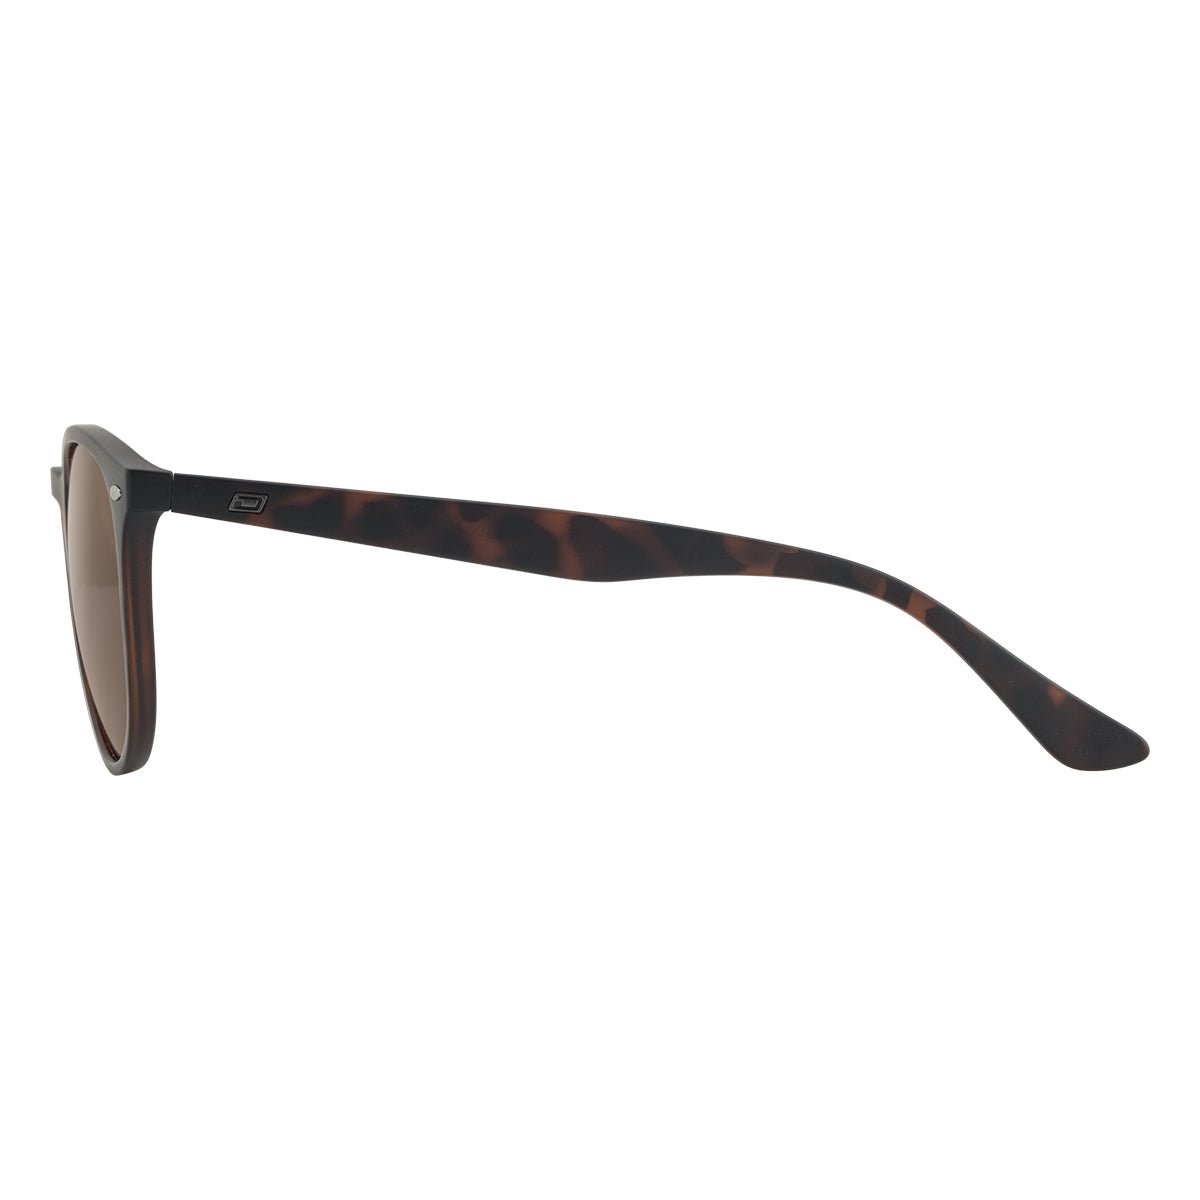 Dirty Dog Racoon Sunglasses - Worthing Watersports - 53785 - Sunglasses - Dirty Dog